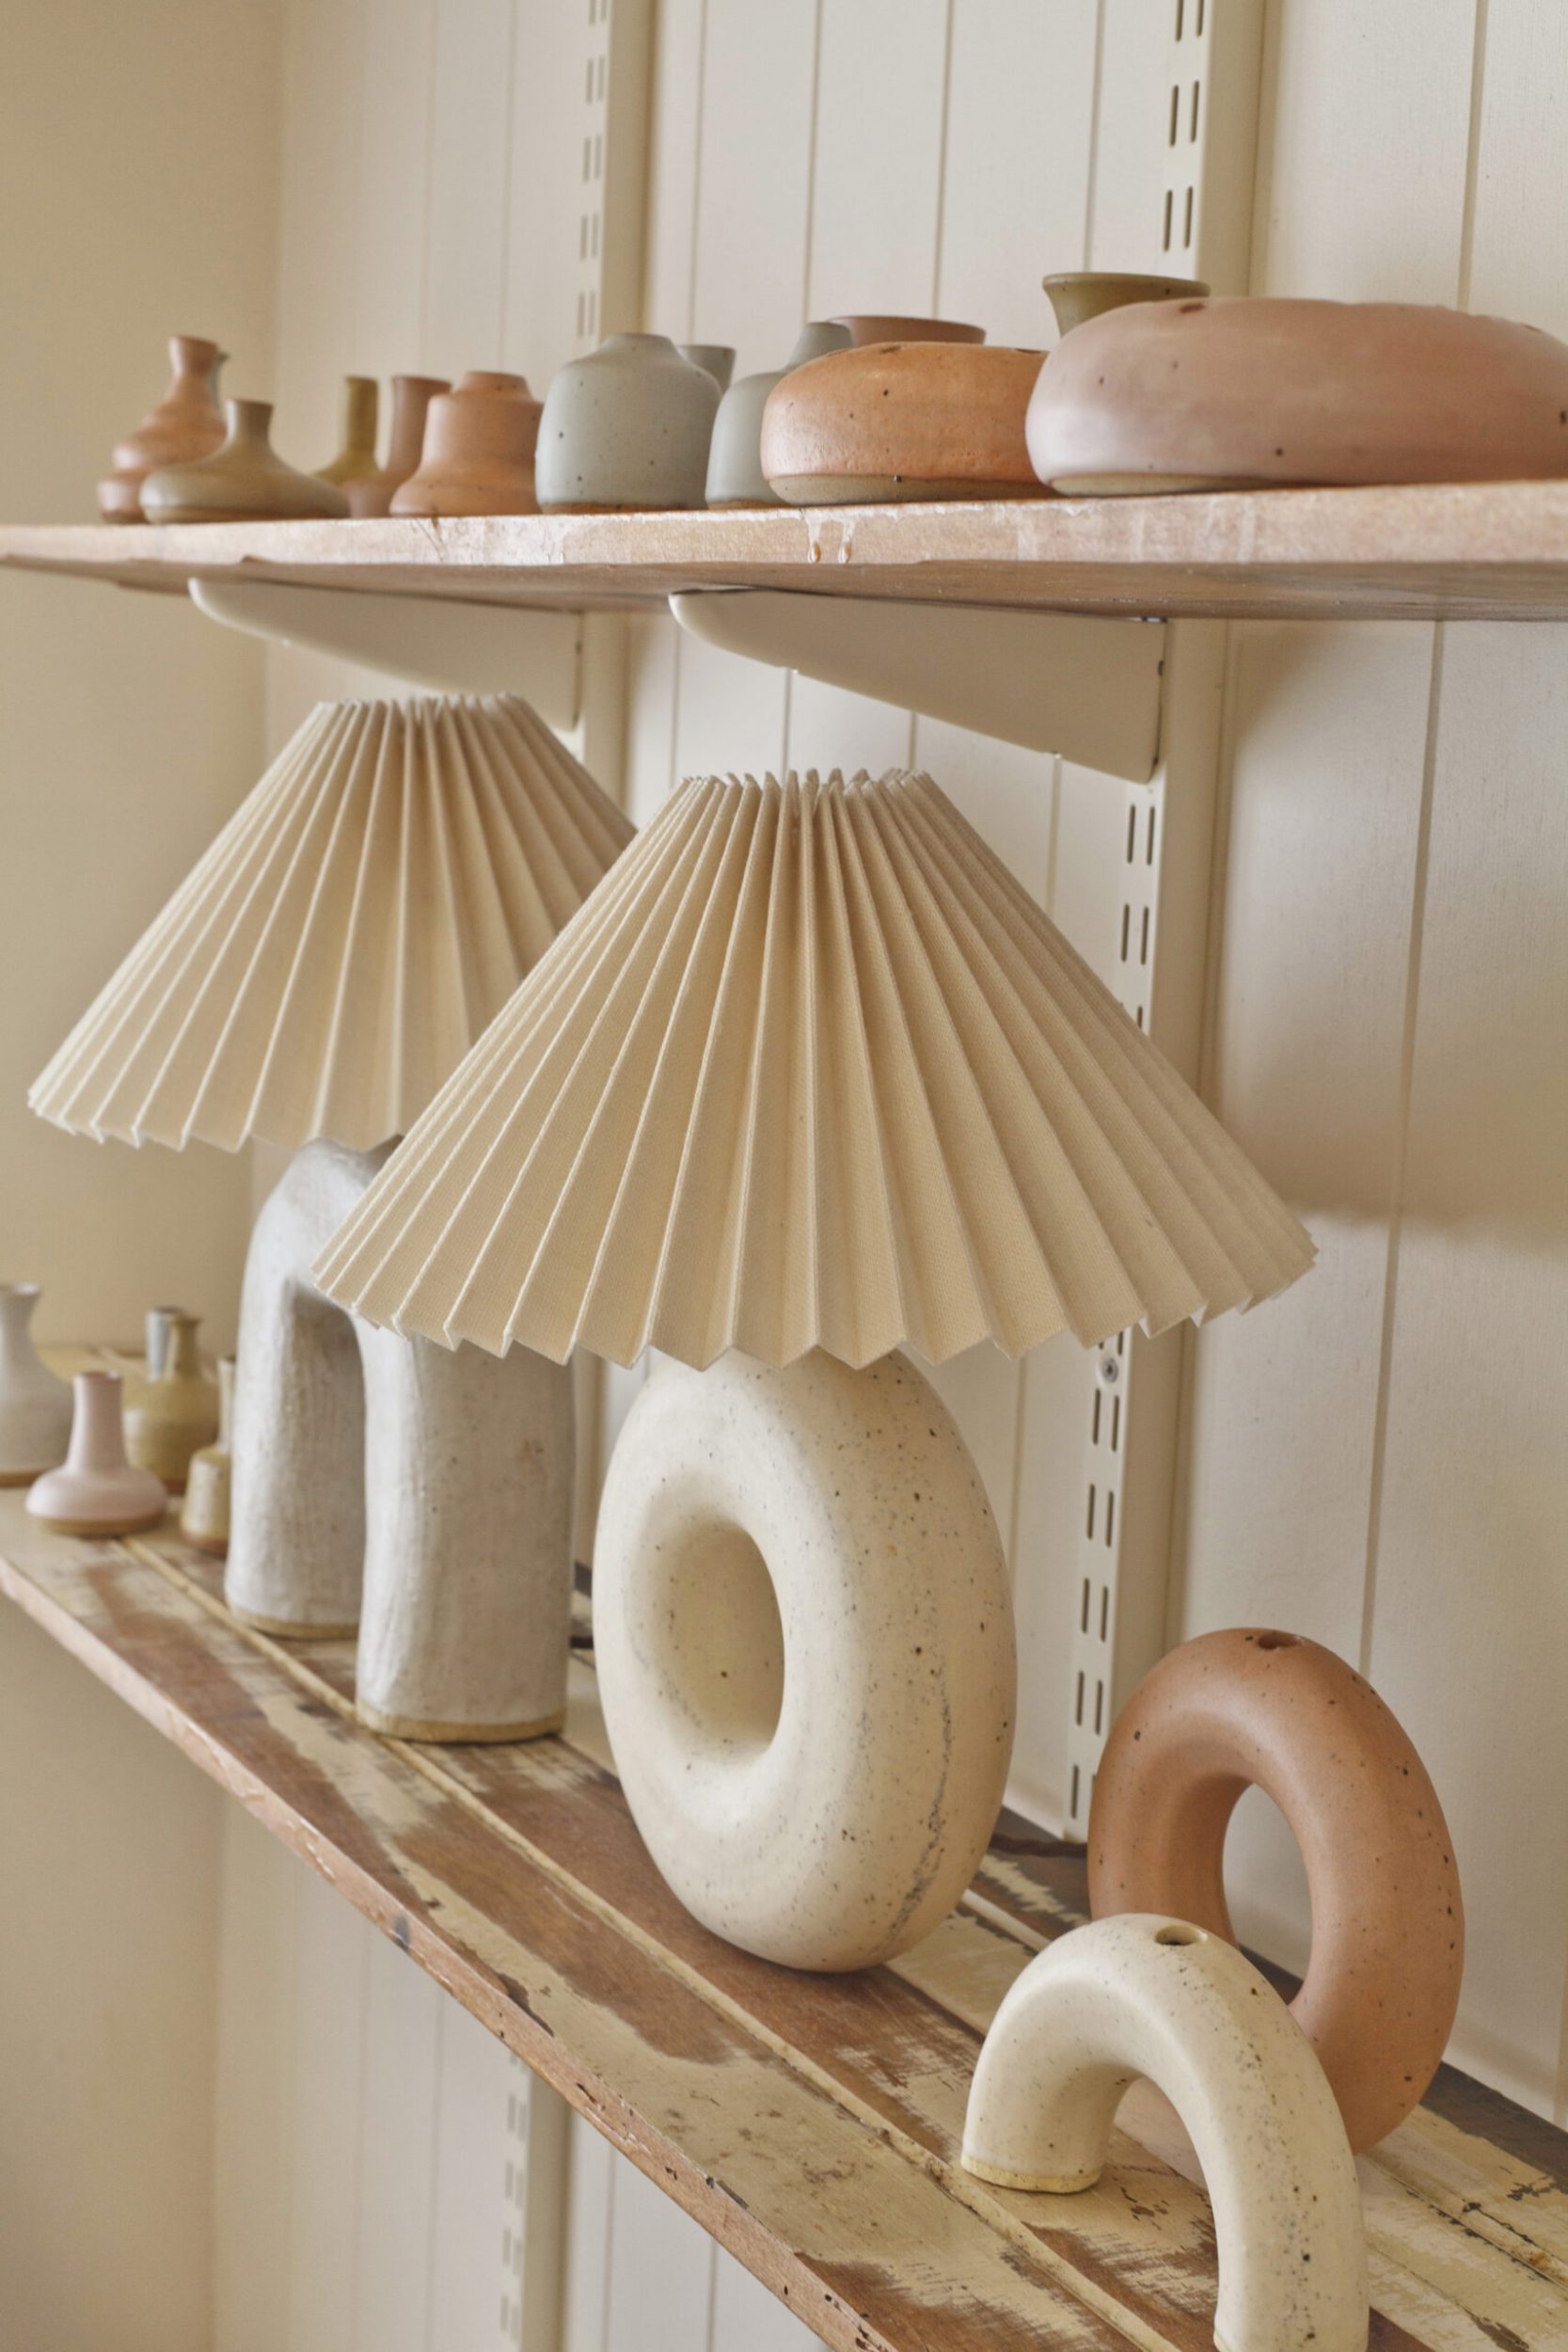 Brown woodwashed shelves holding Deborah Sweeney's ceramics and lamps. Their colours are white, grey and terracotta orange 